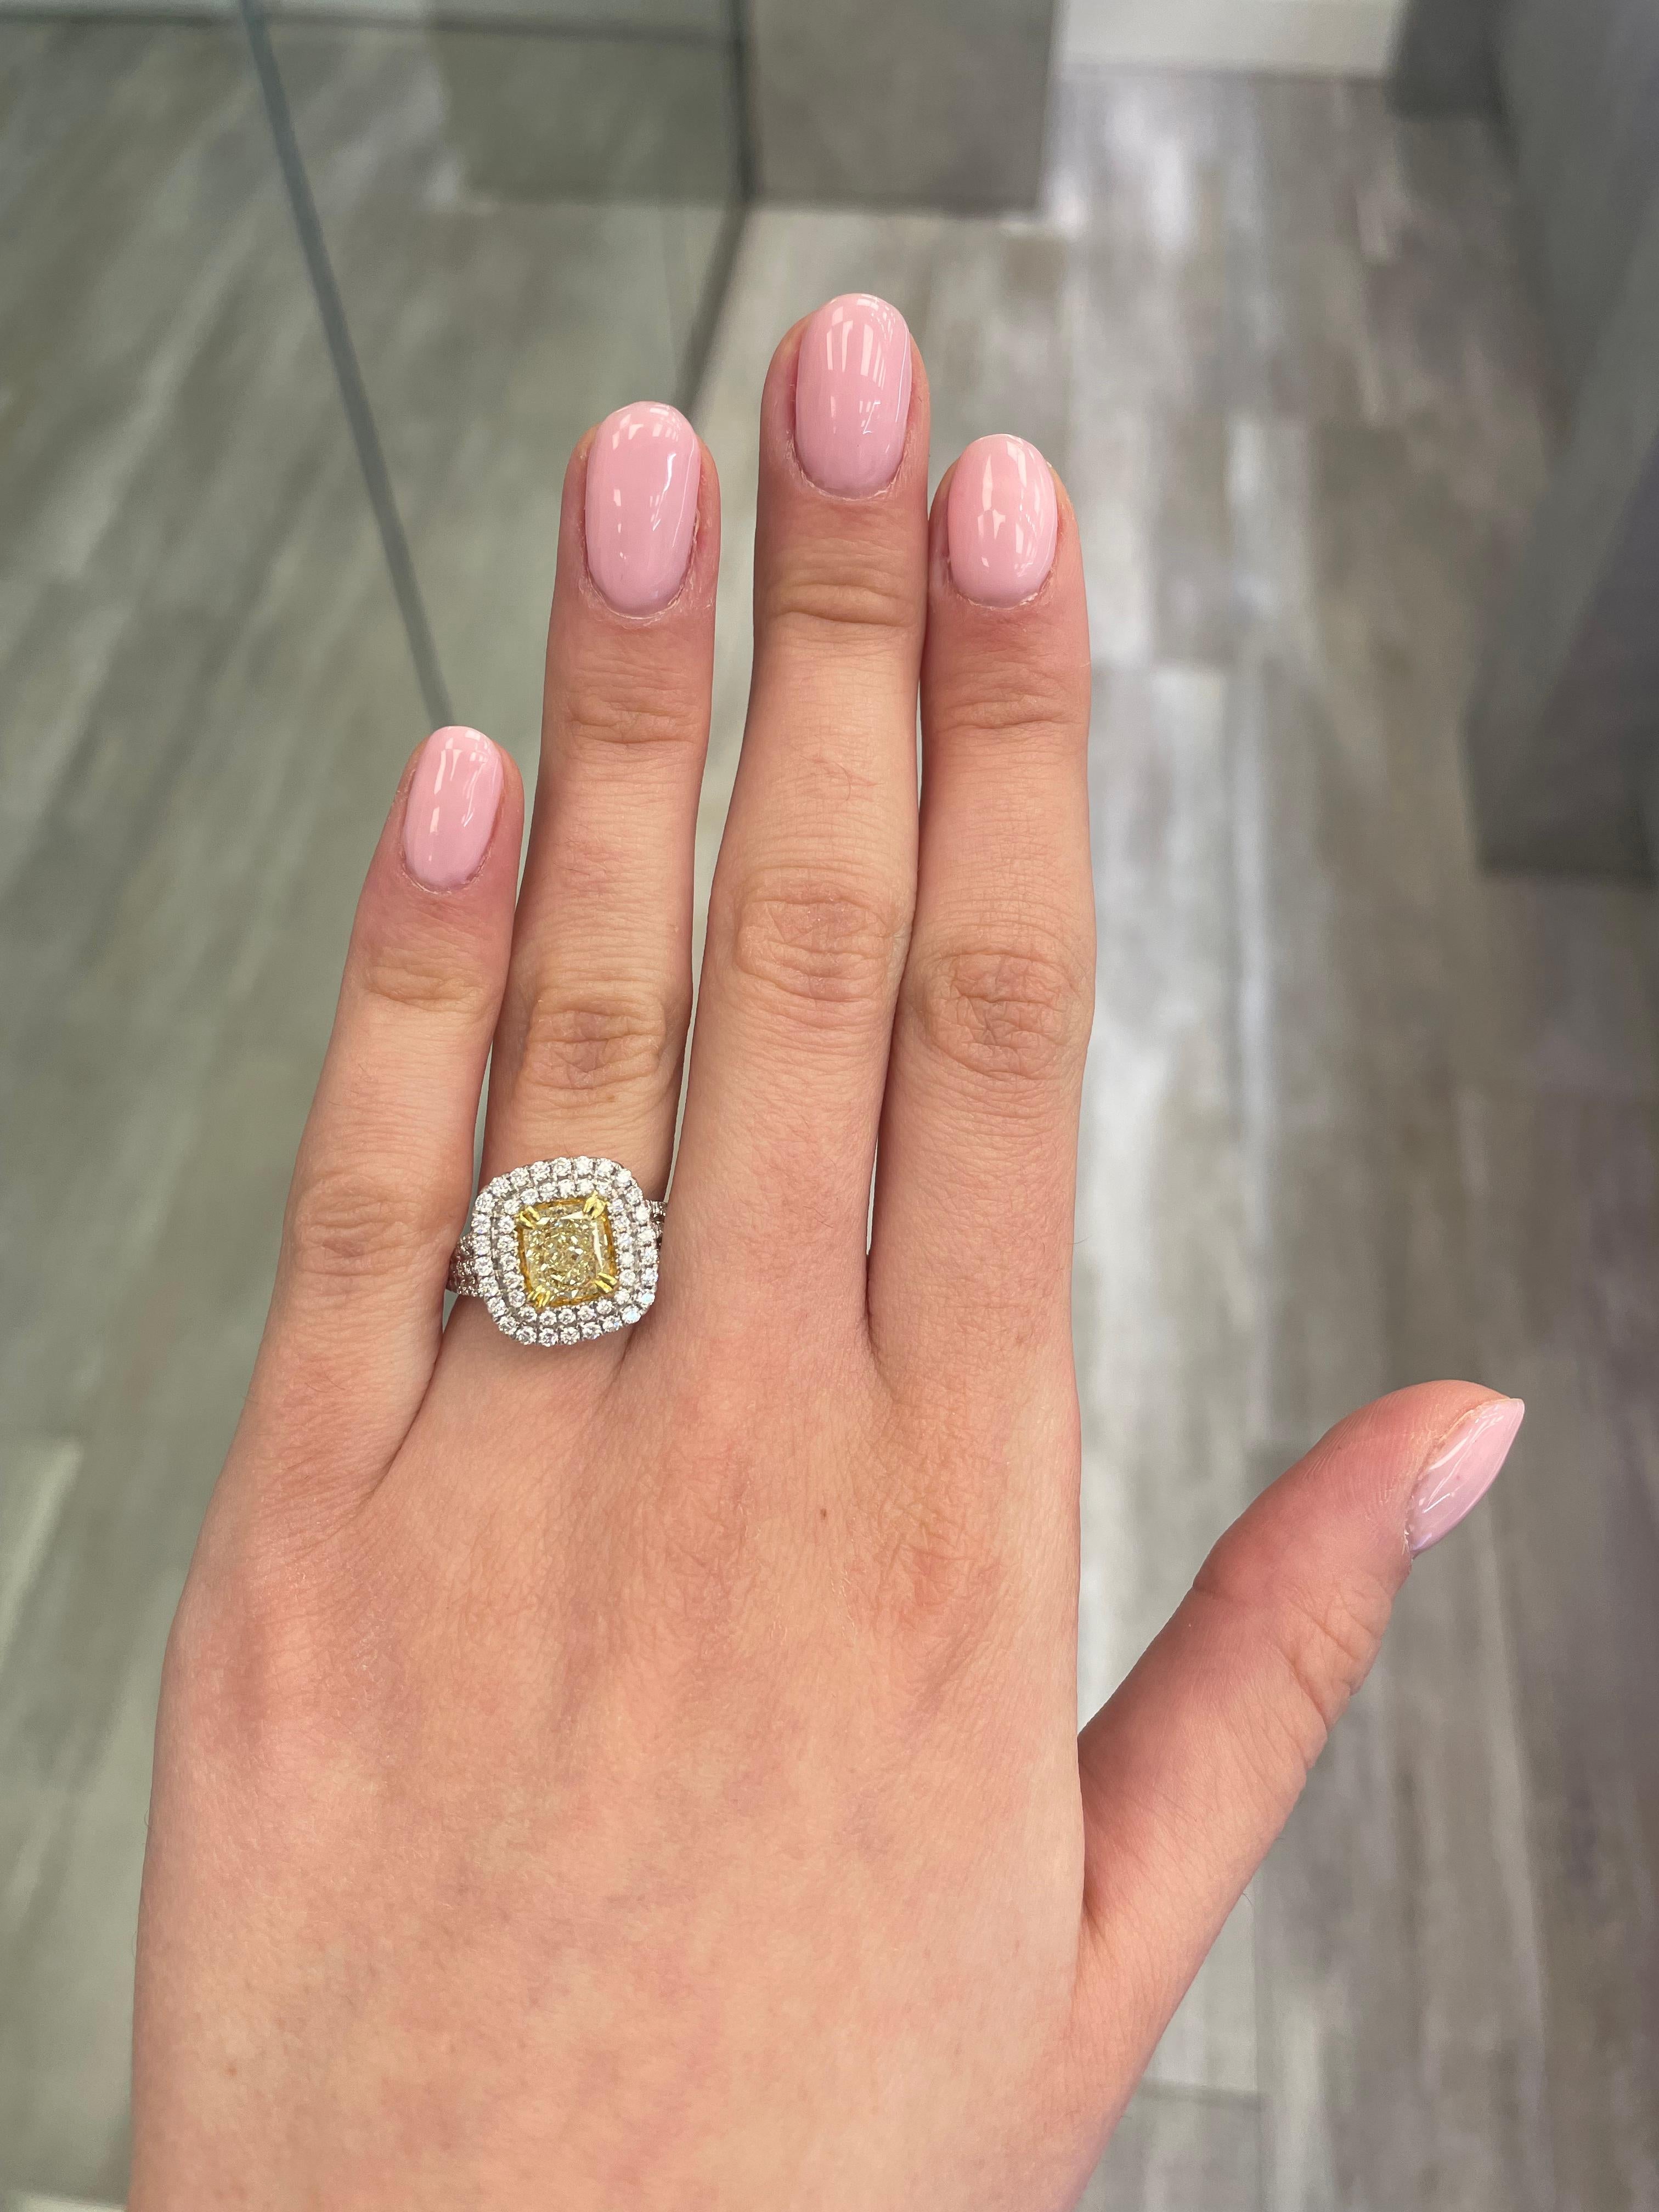 Stunning modern EGL certified fancy yellow diamond double halo ring, two-tone 18k yellow and white gold, split shank. By Alexander Beverly Hills
2.27 carats total diamond weight.
1.50 carat cushion cut Fancy Yellow color and SI1 clarity diamond, EGL